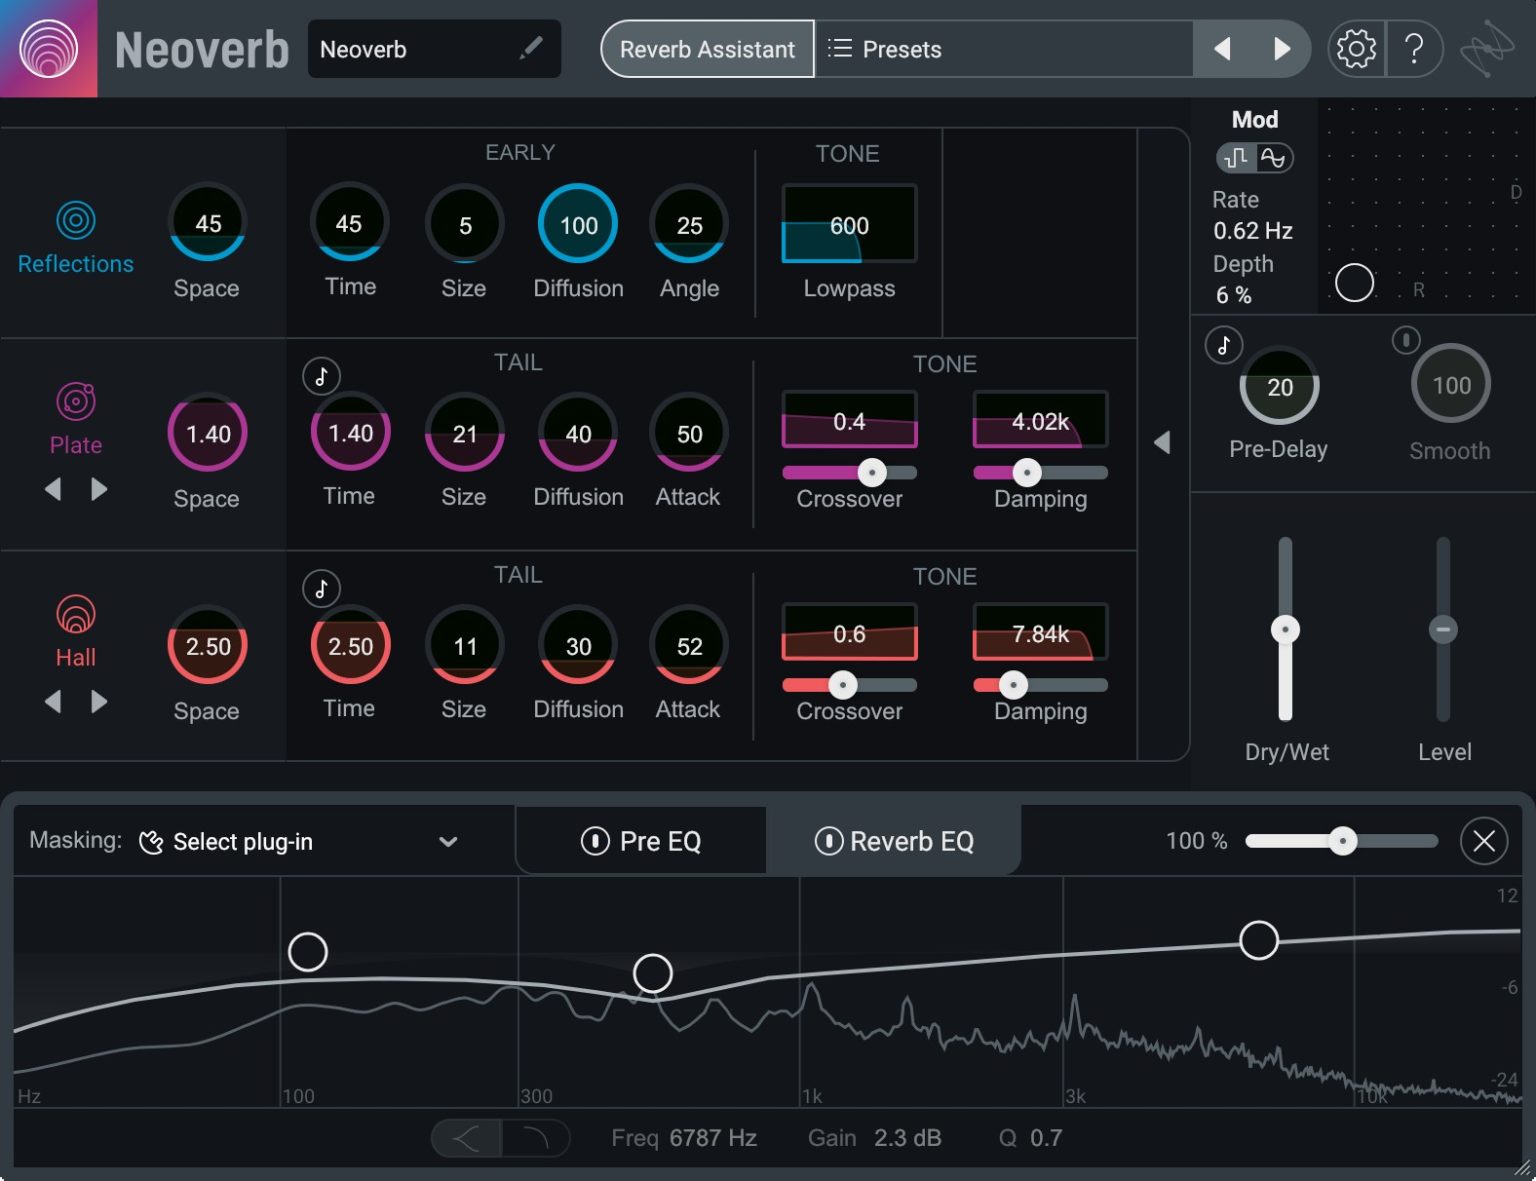 instal the new version for ios iZotope Neoverb 1.3.0